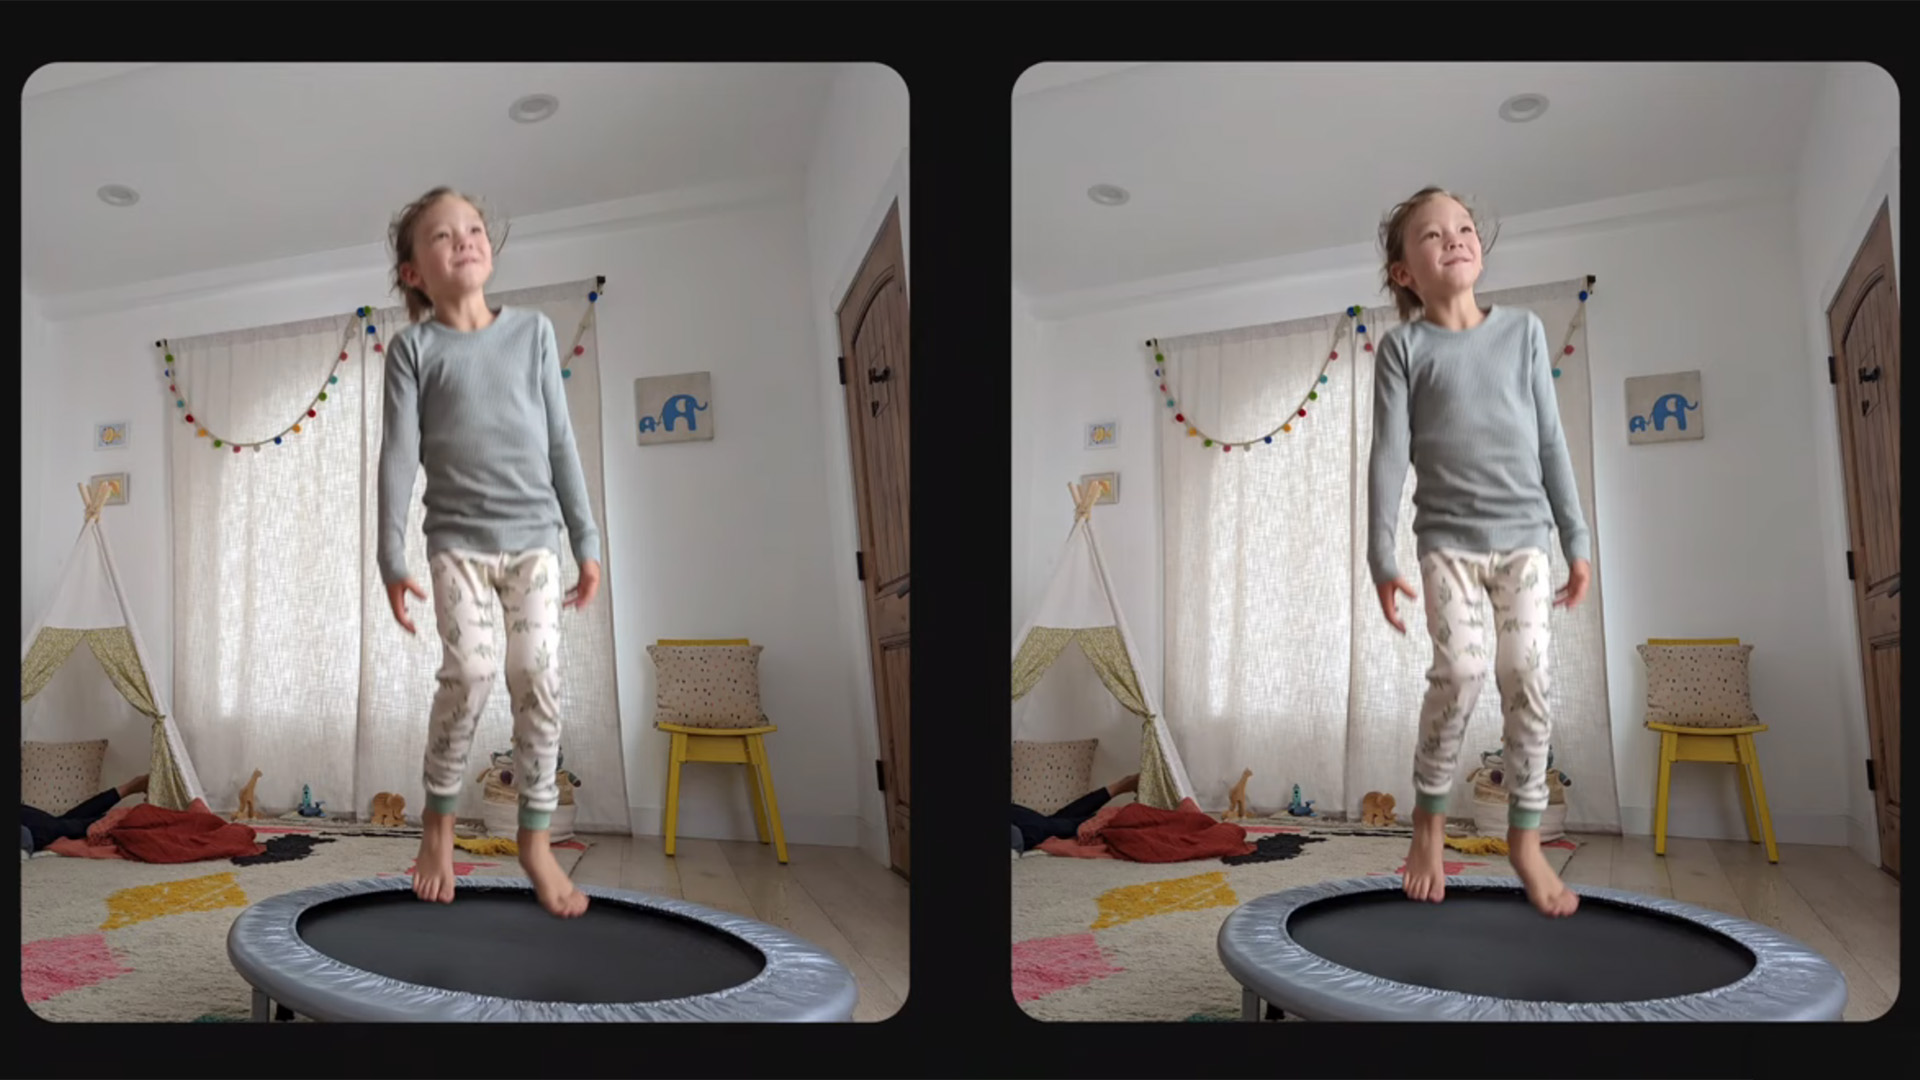 The Google Pixel 6's Face Unblur feature in action